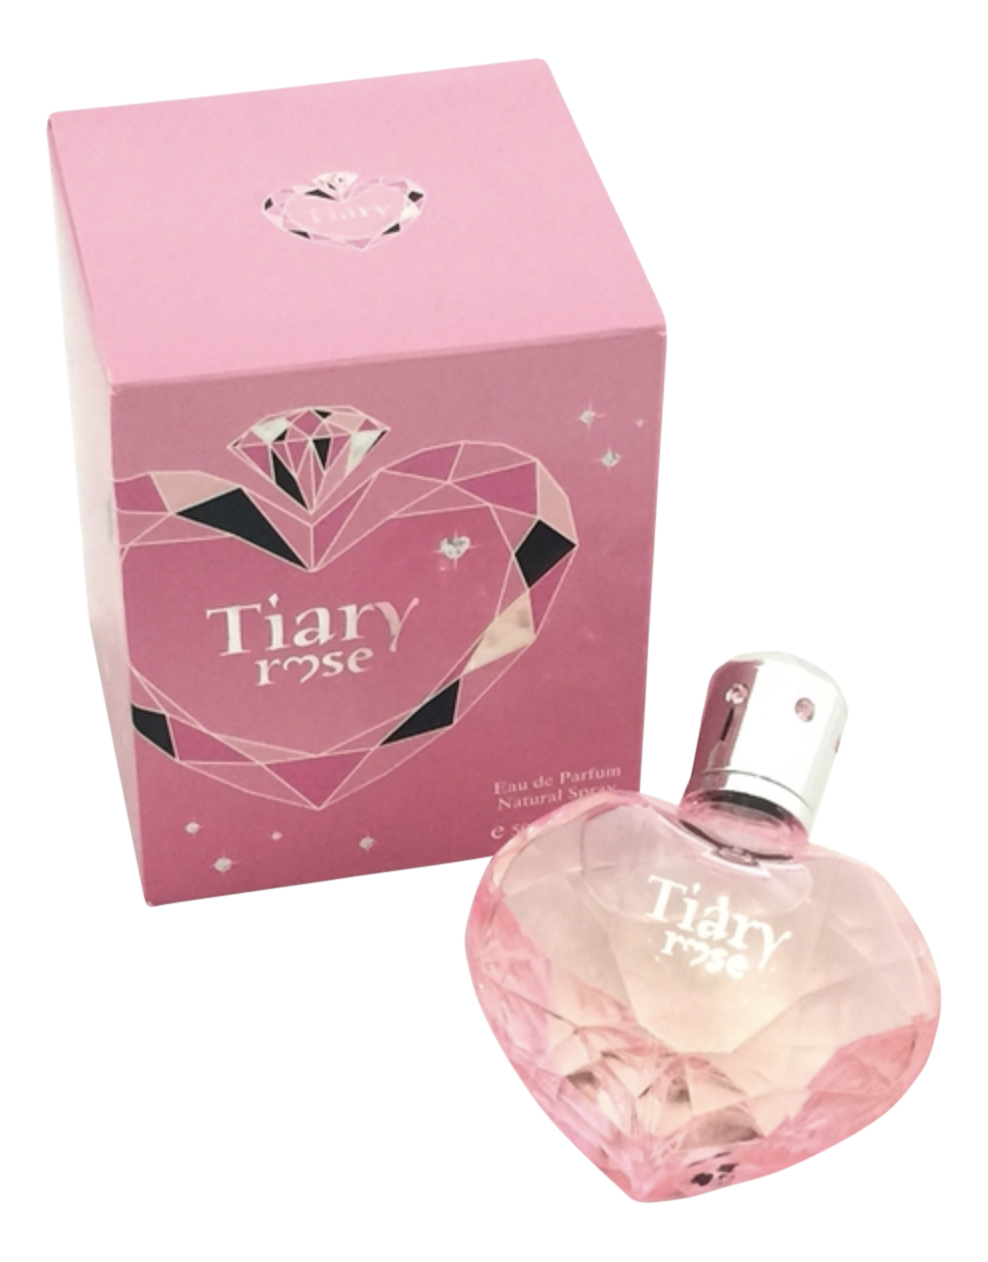 Tiary Rose / ティアリー ローズ by Tiary / ティアリー (Eau de Parfum) » Reviews  Perfume  Facts